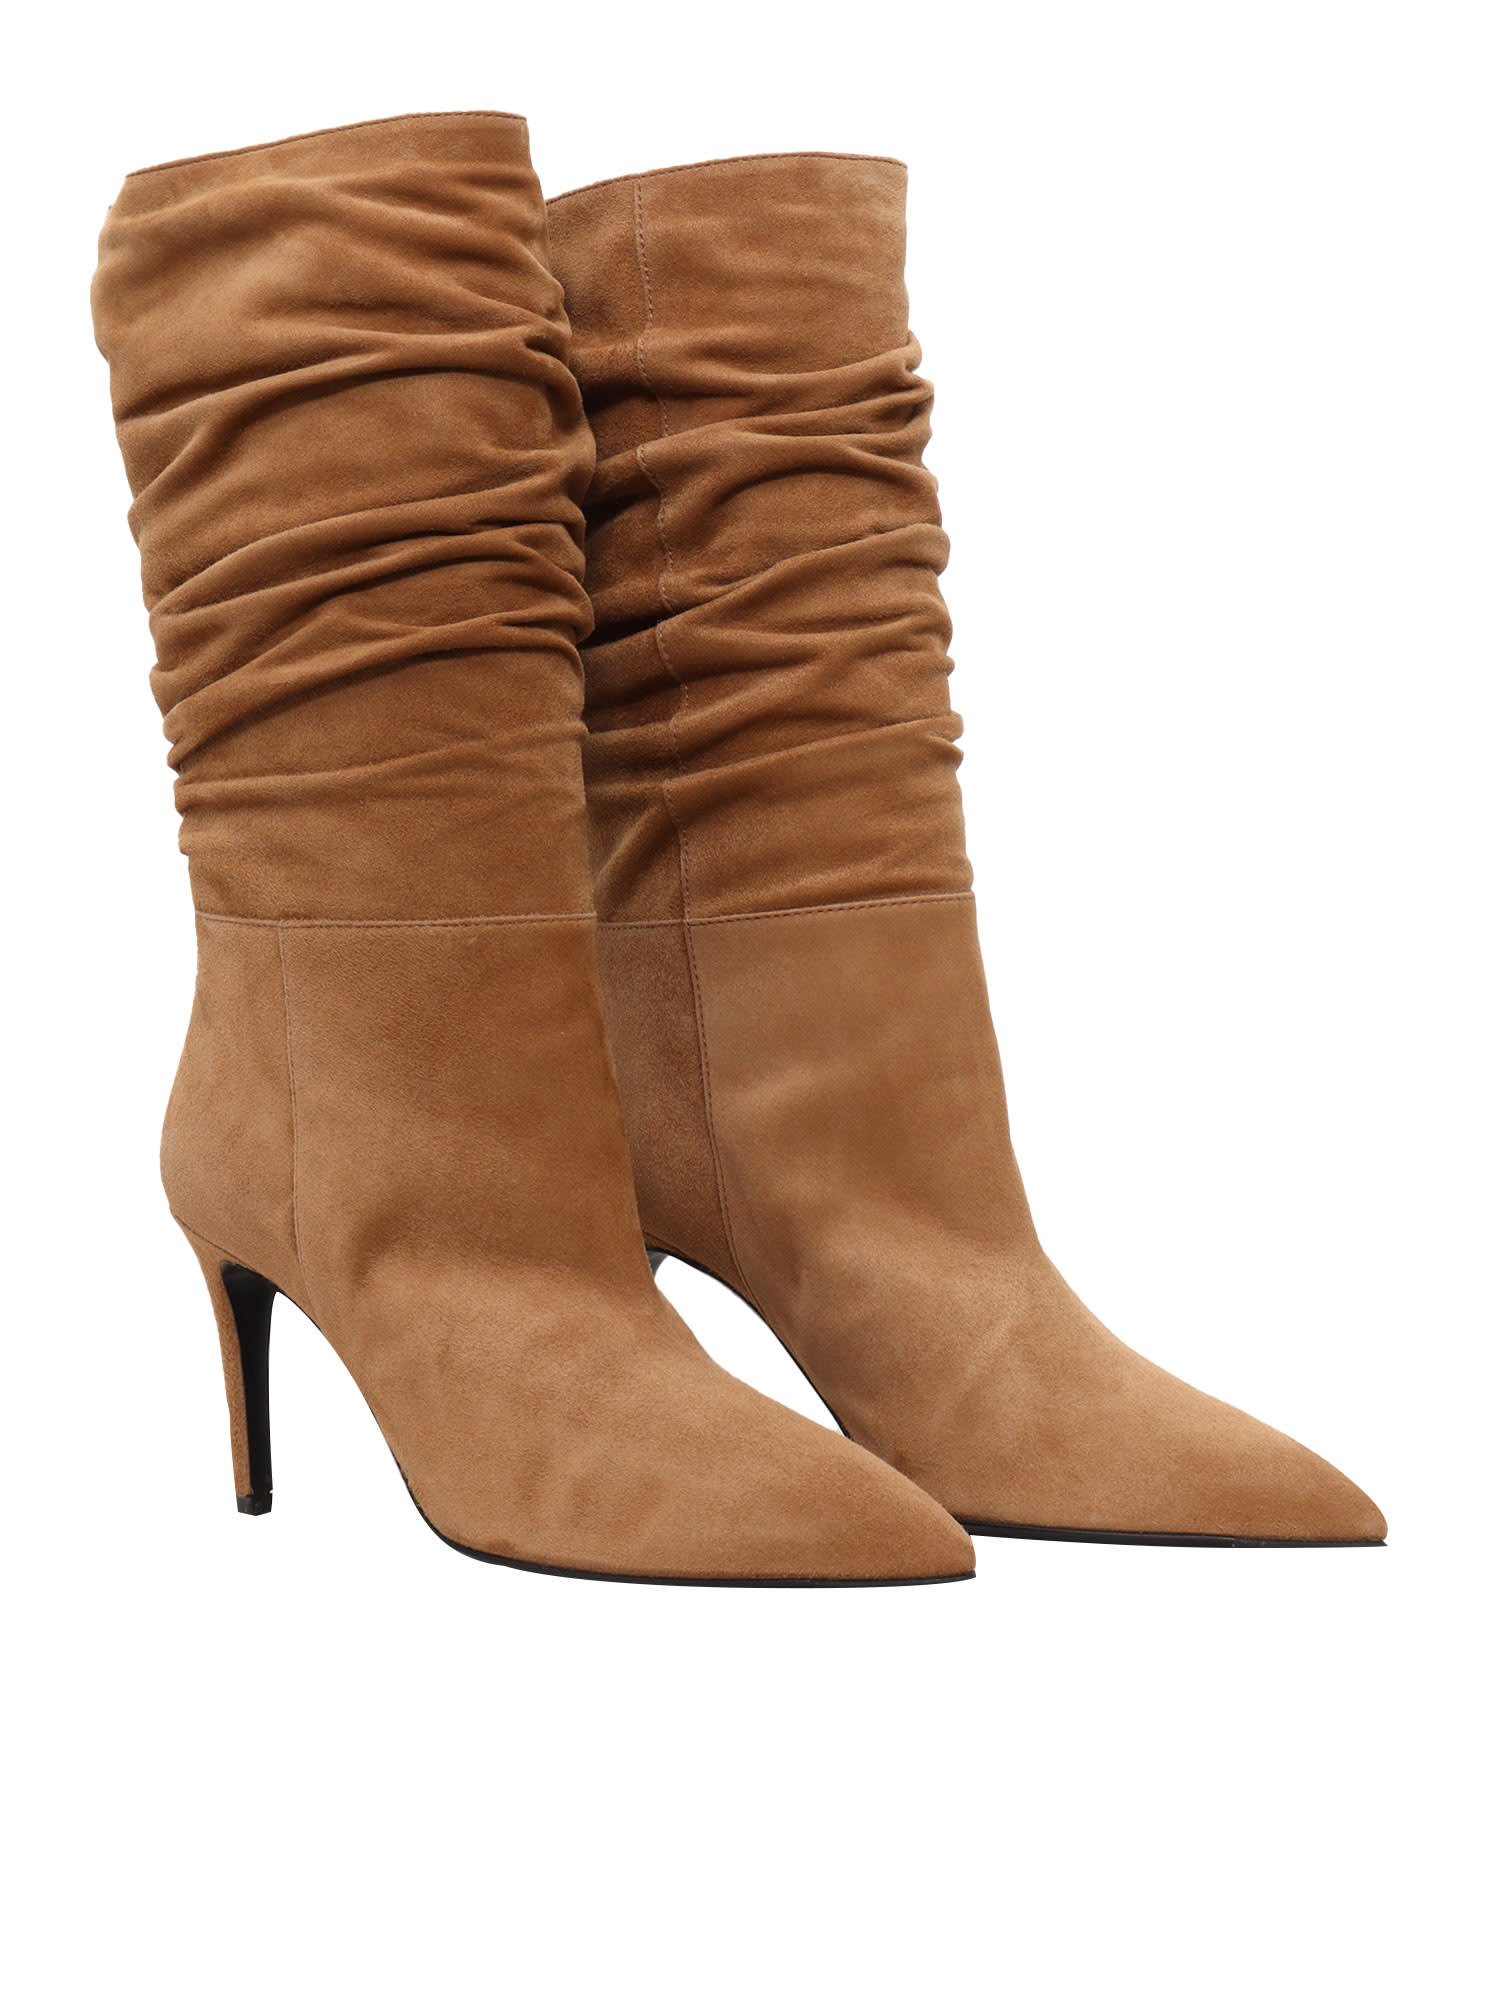 Shop Via Roma 15 Curled Brown Boot